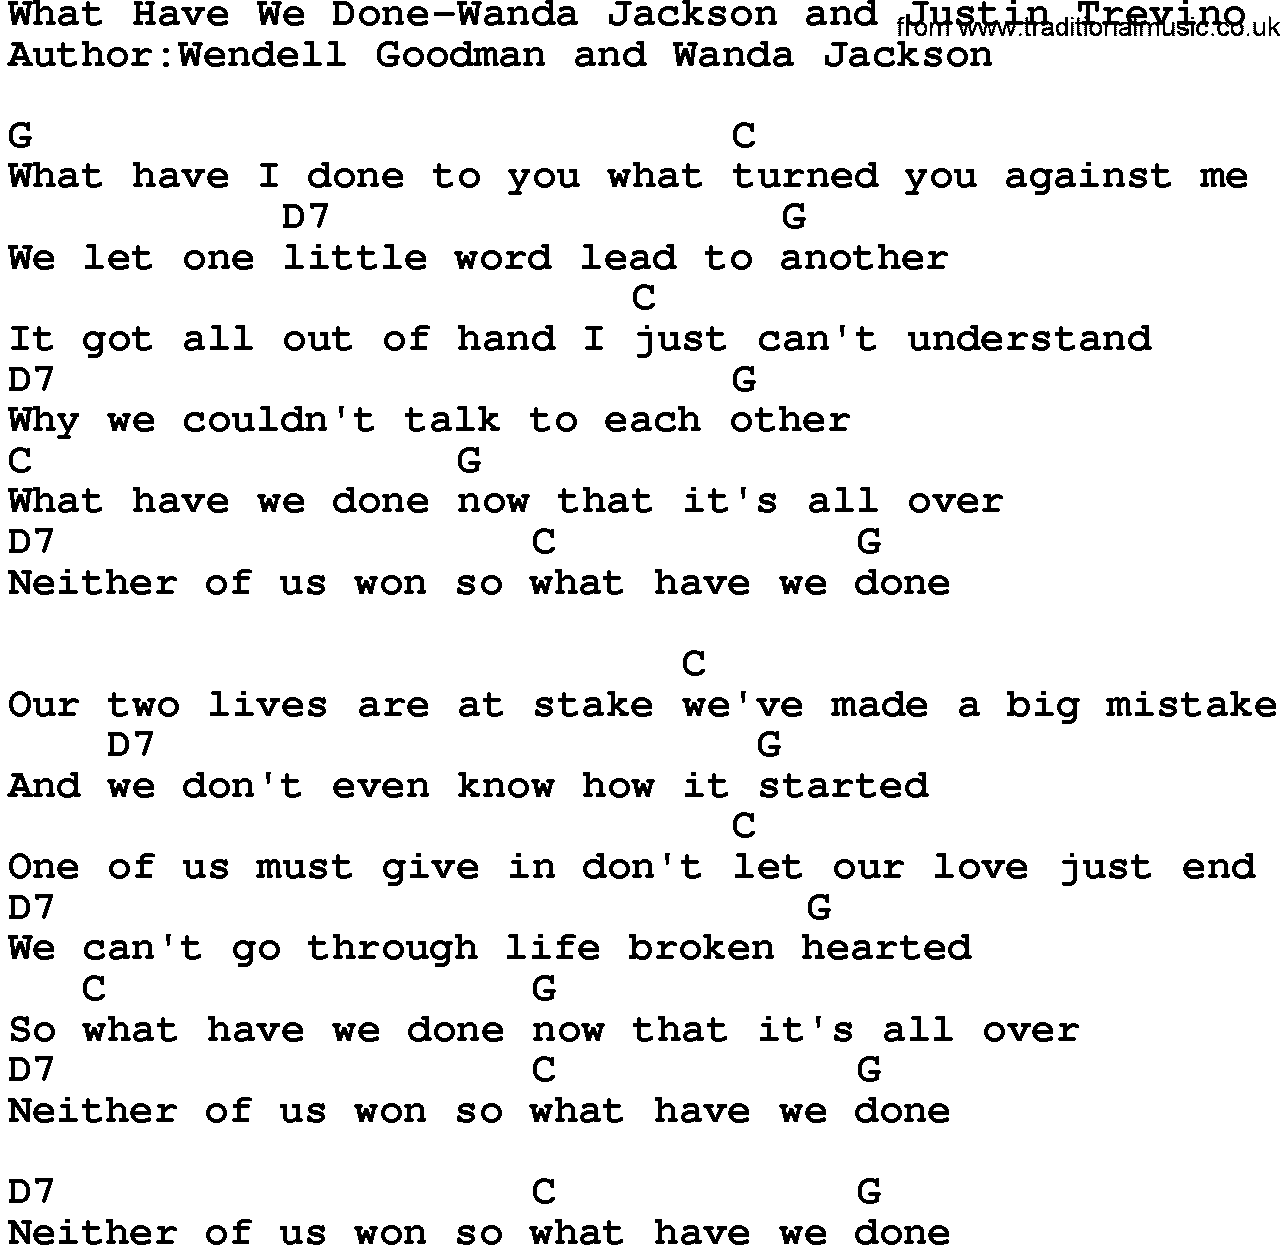 Country music song: What Have We Done-Wanda Jackson And Justin Trevino lyrics and chords